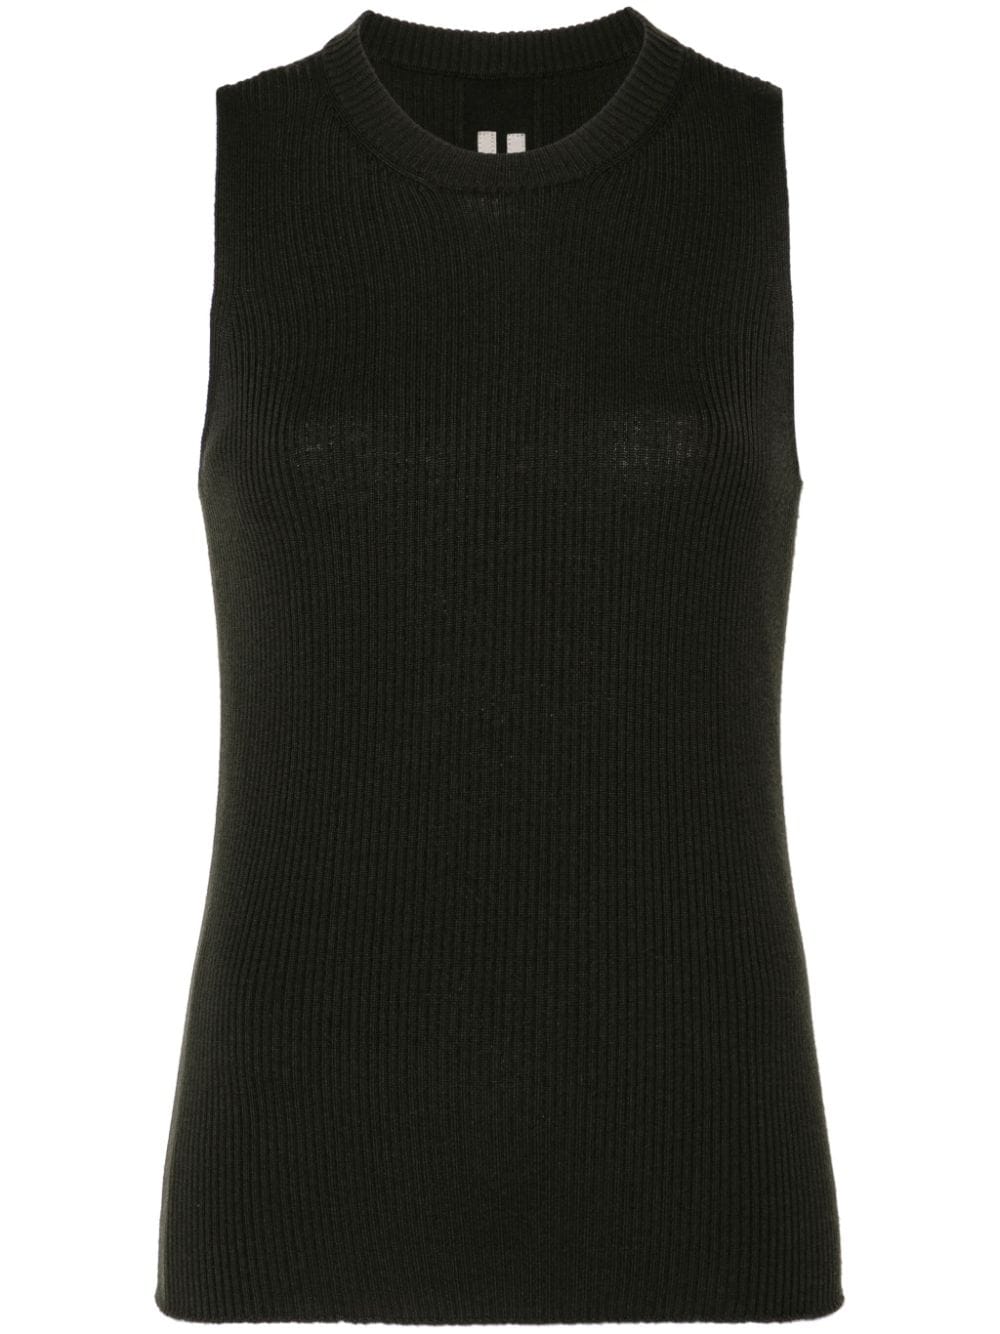 Rick Owens ribbed knitted top - Green von Rick Owens